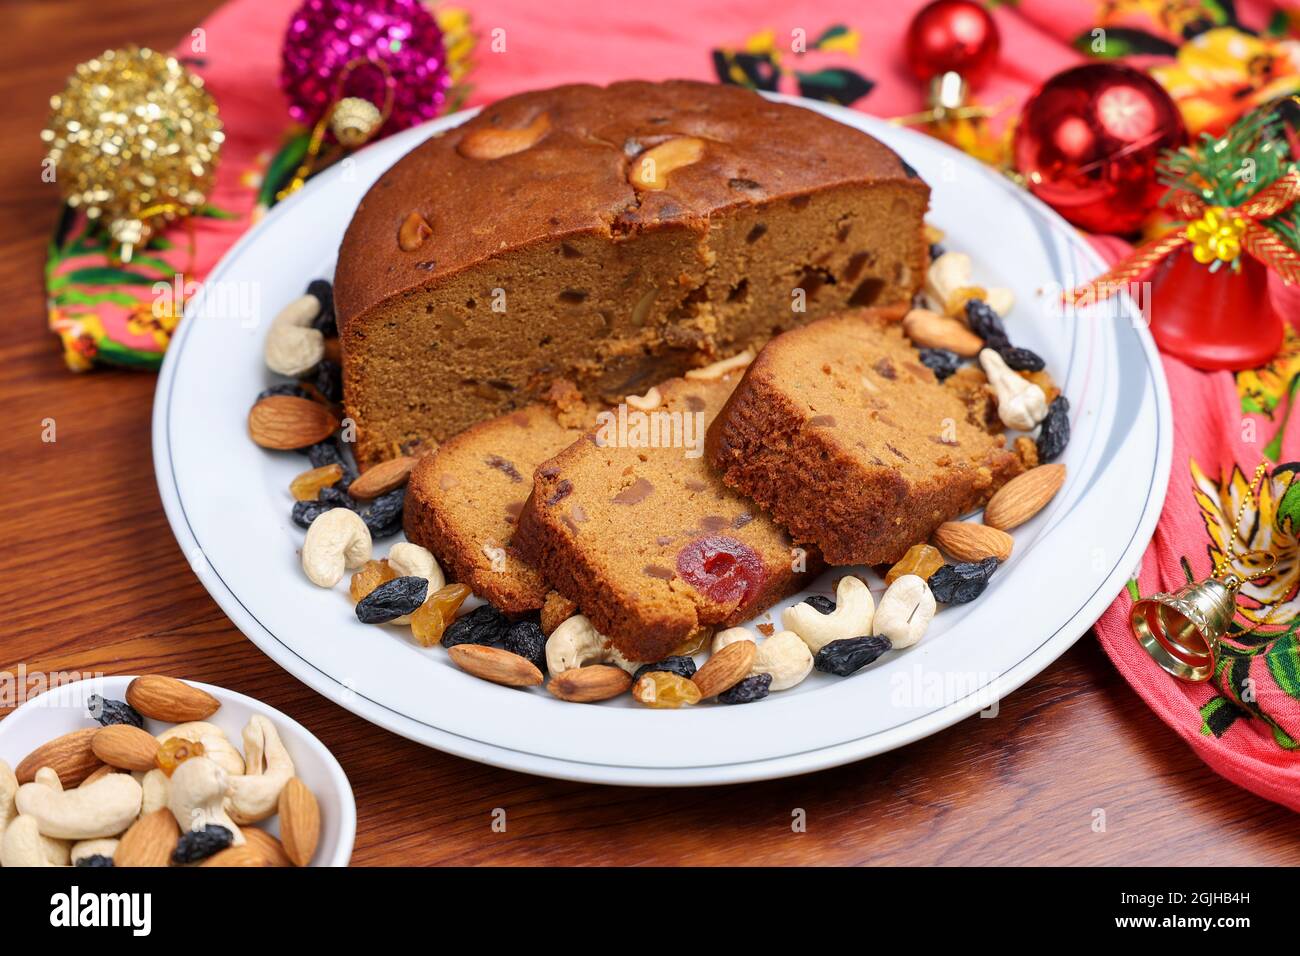 Plum Cake For Christmas: Here is the REAL reason why you must start making Plum  Cake in advance